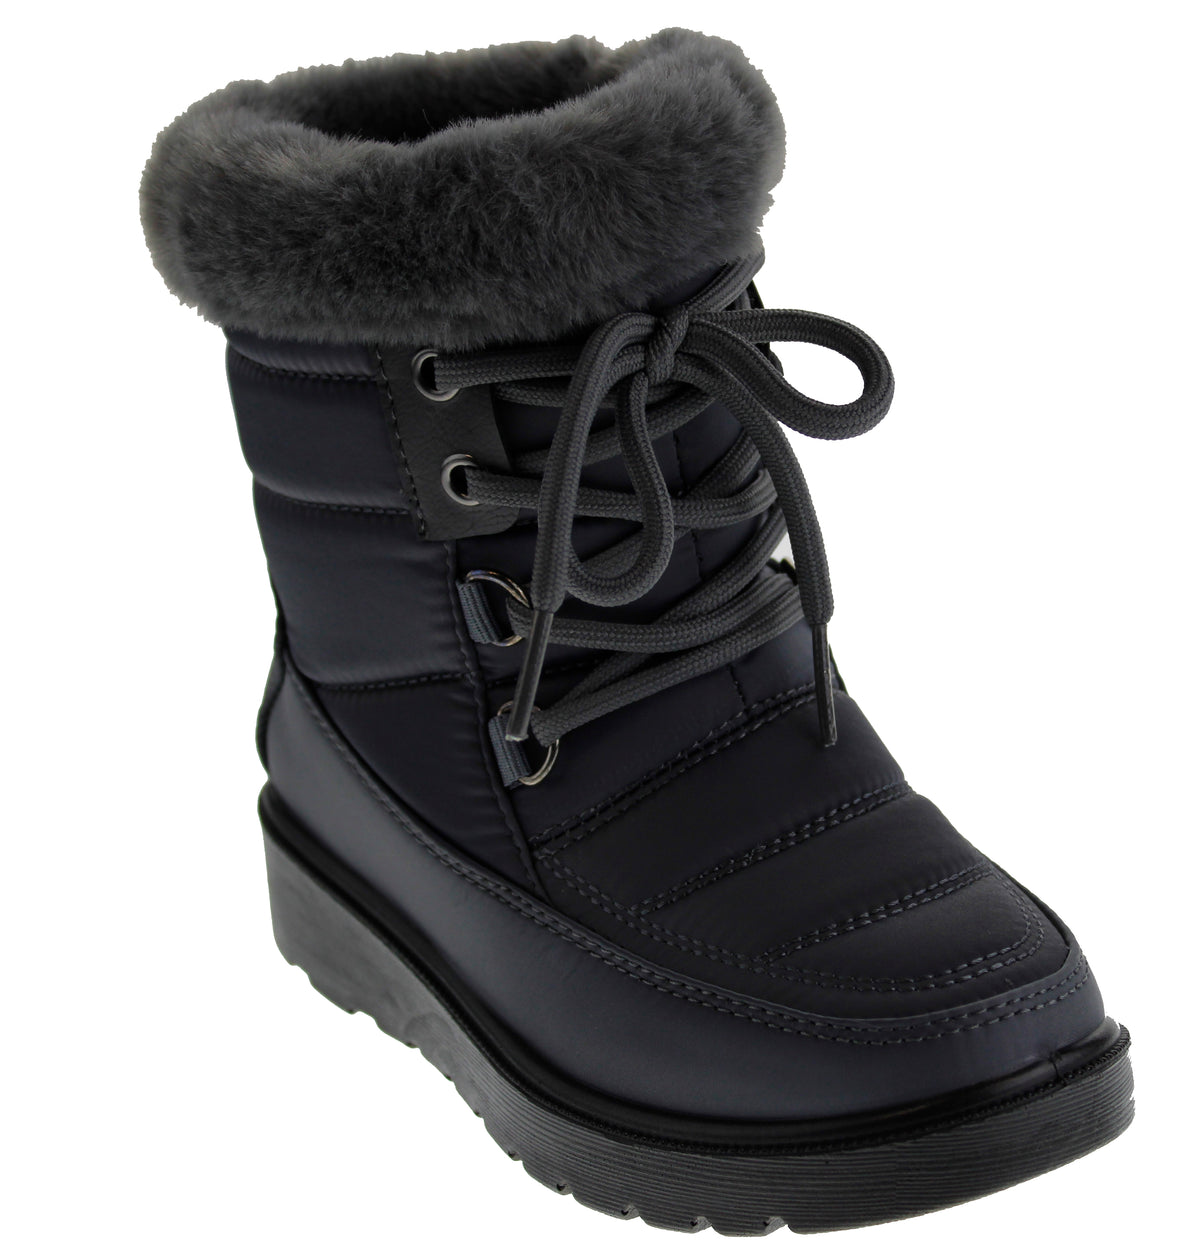 Coleen 8K Girls Insulated Fur Lined Lace Up Rain/Snow Boot